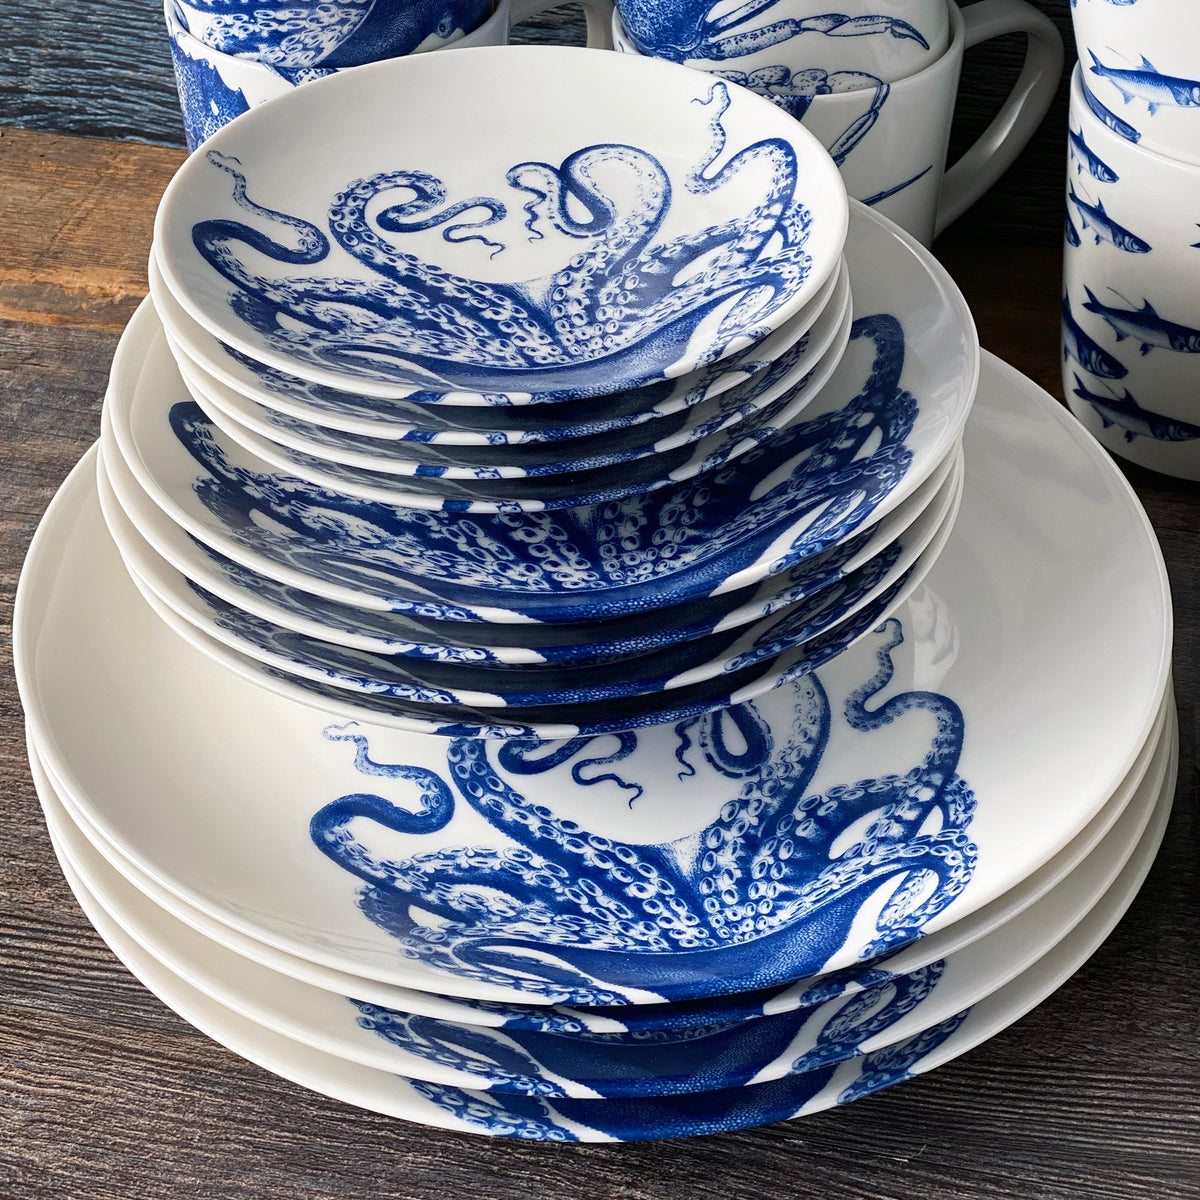 A stack of Coastal Collection 48 Pc. Set plates with ocean-inspired octopus designs by Caskata Artisanal Home.